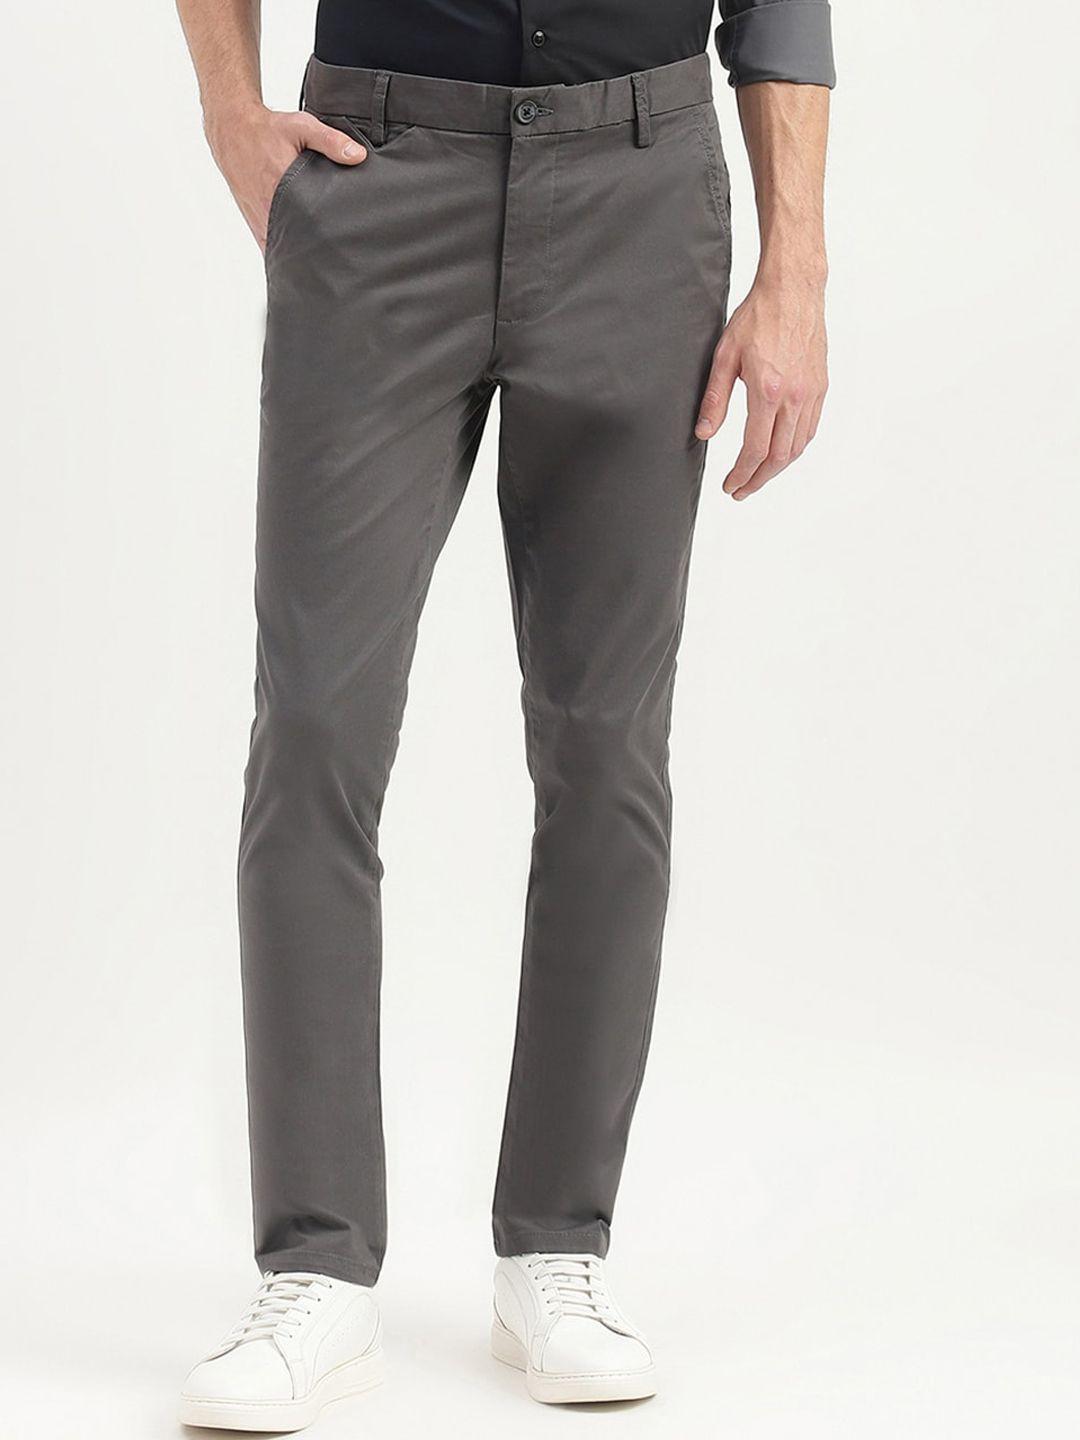 united-colors-of-benetton-men-mid-rise-chinos-trousers